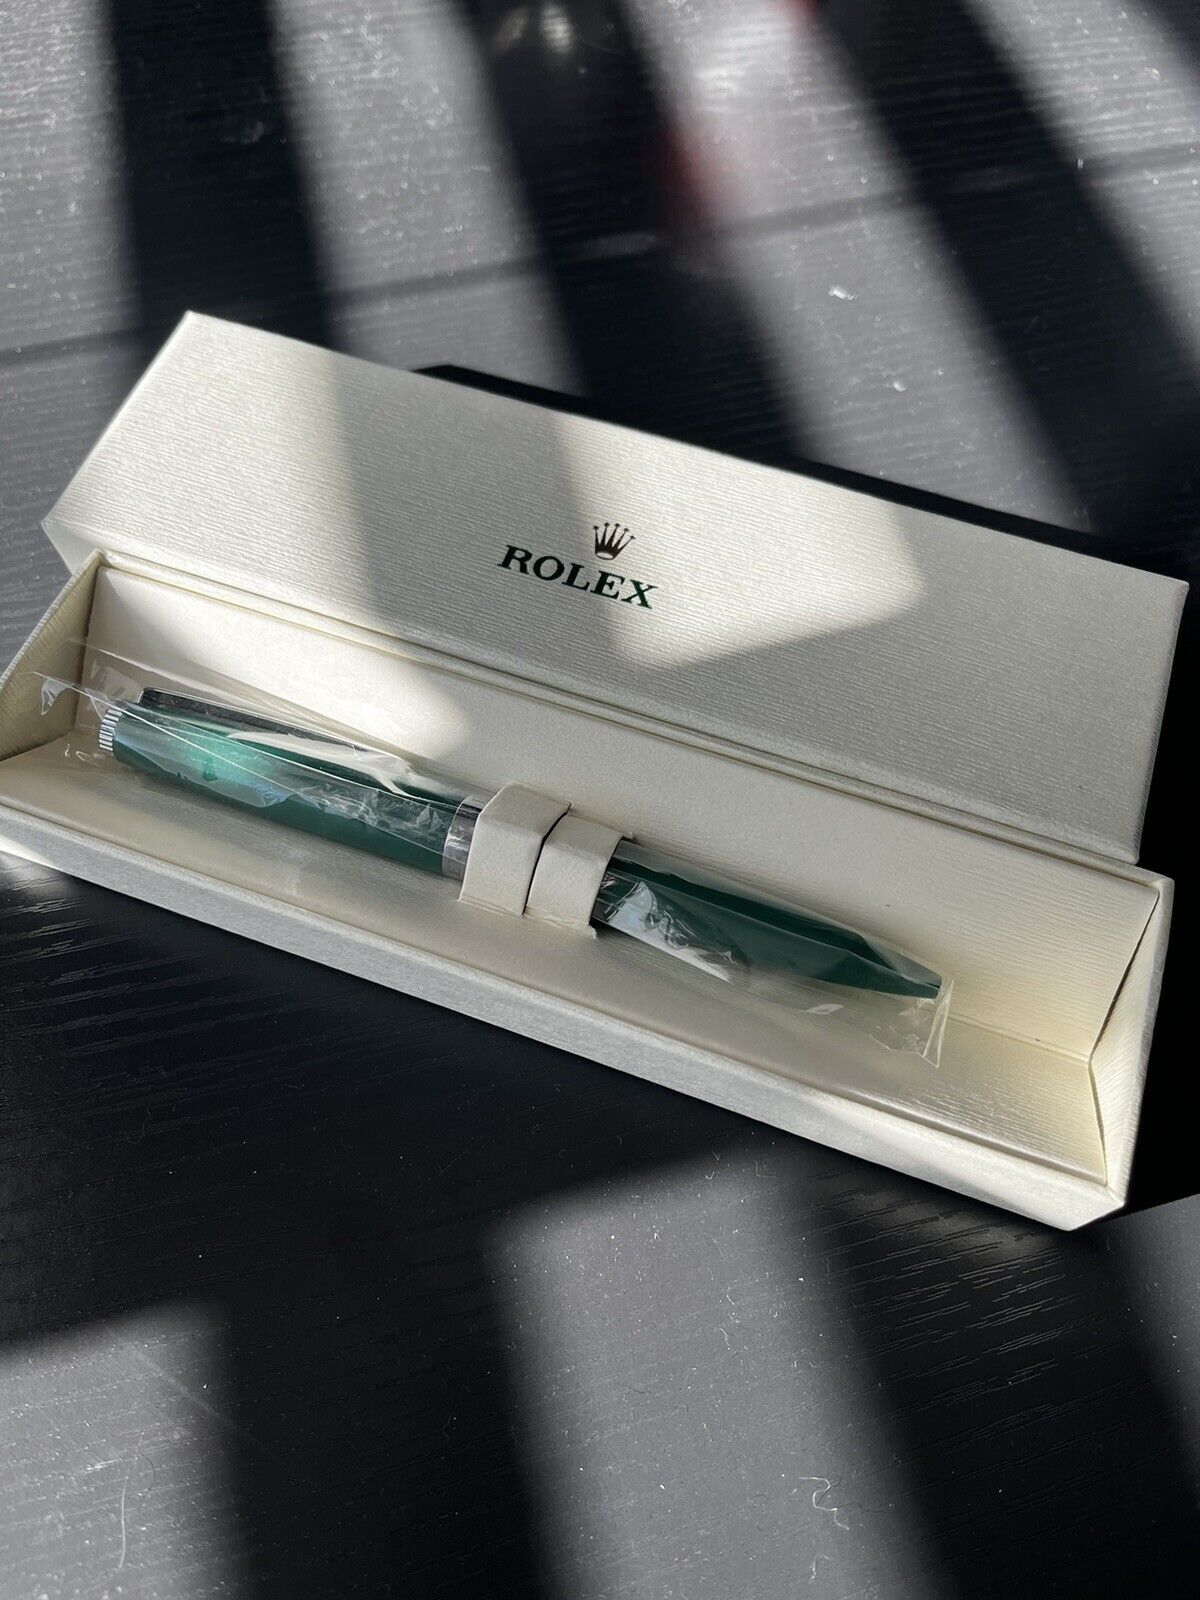 New Rolex Green Executive Screw Twist Cap Pen with Box - Great Gift